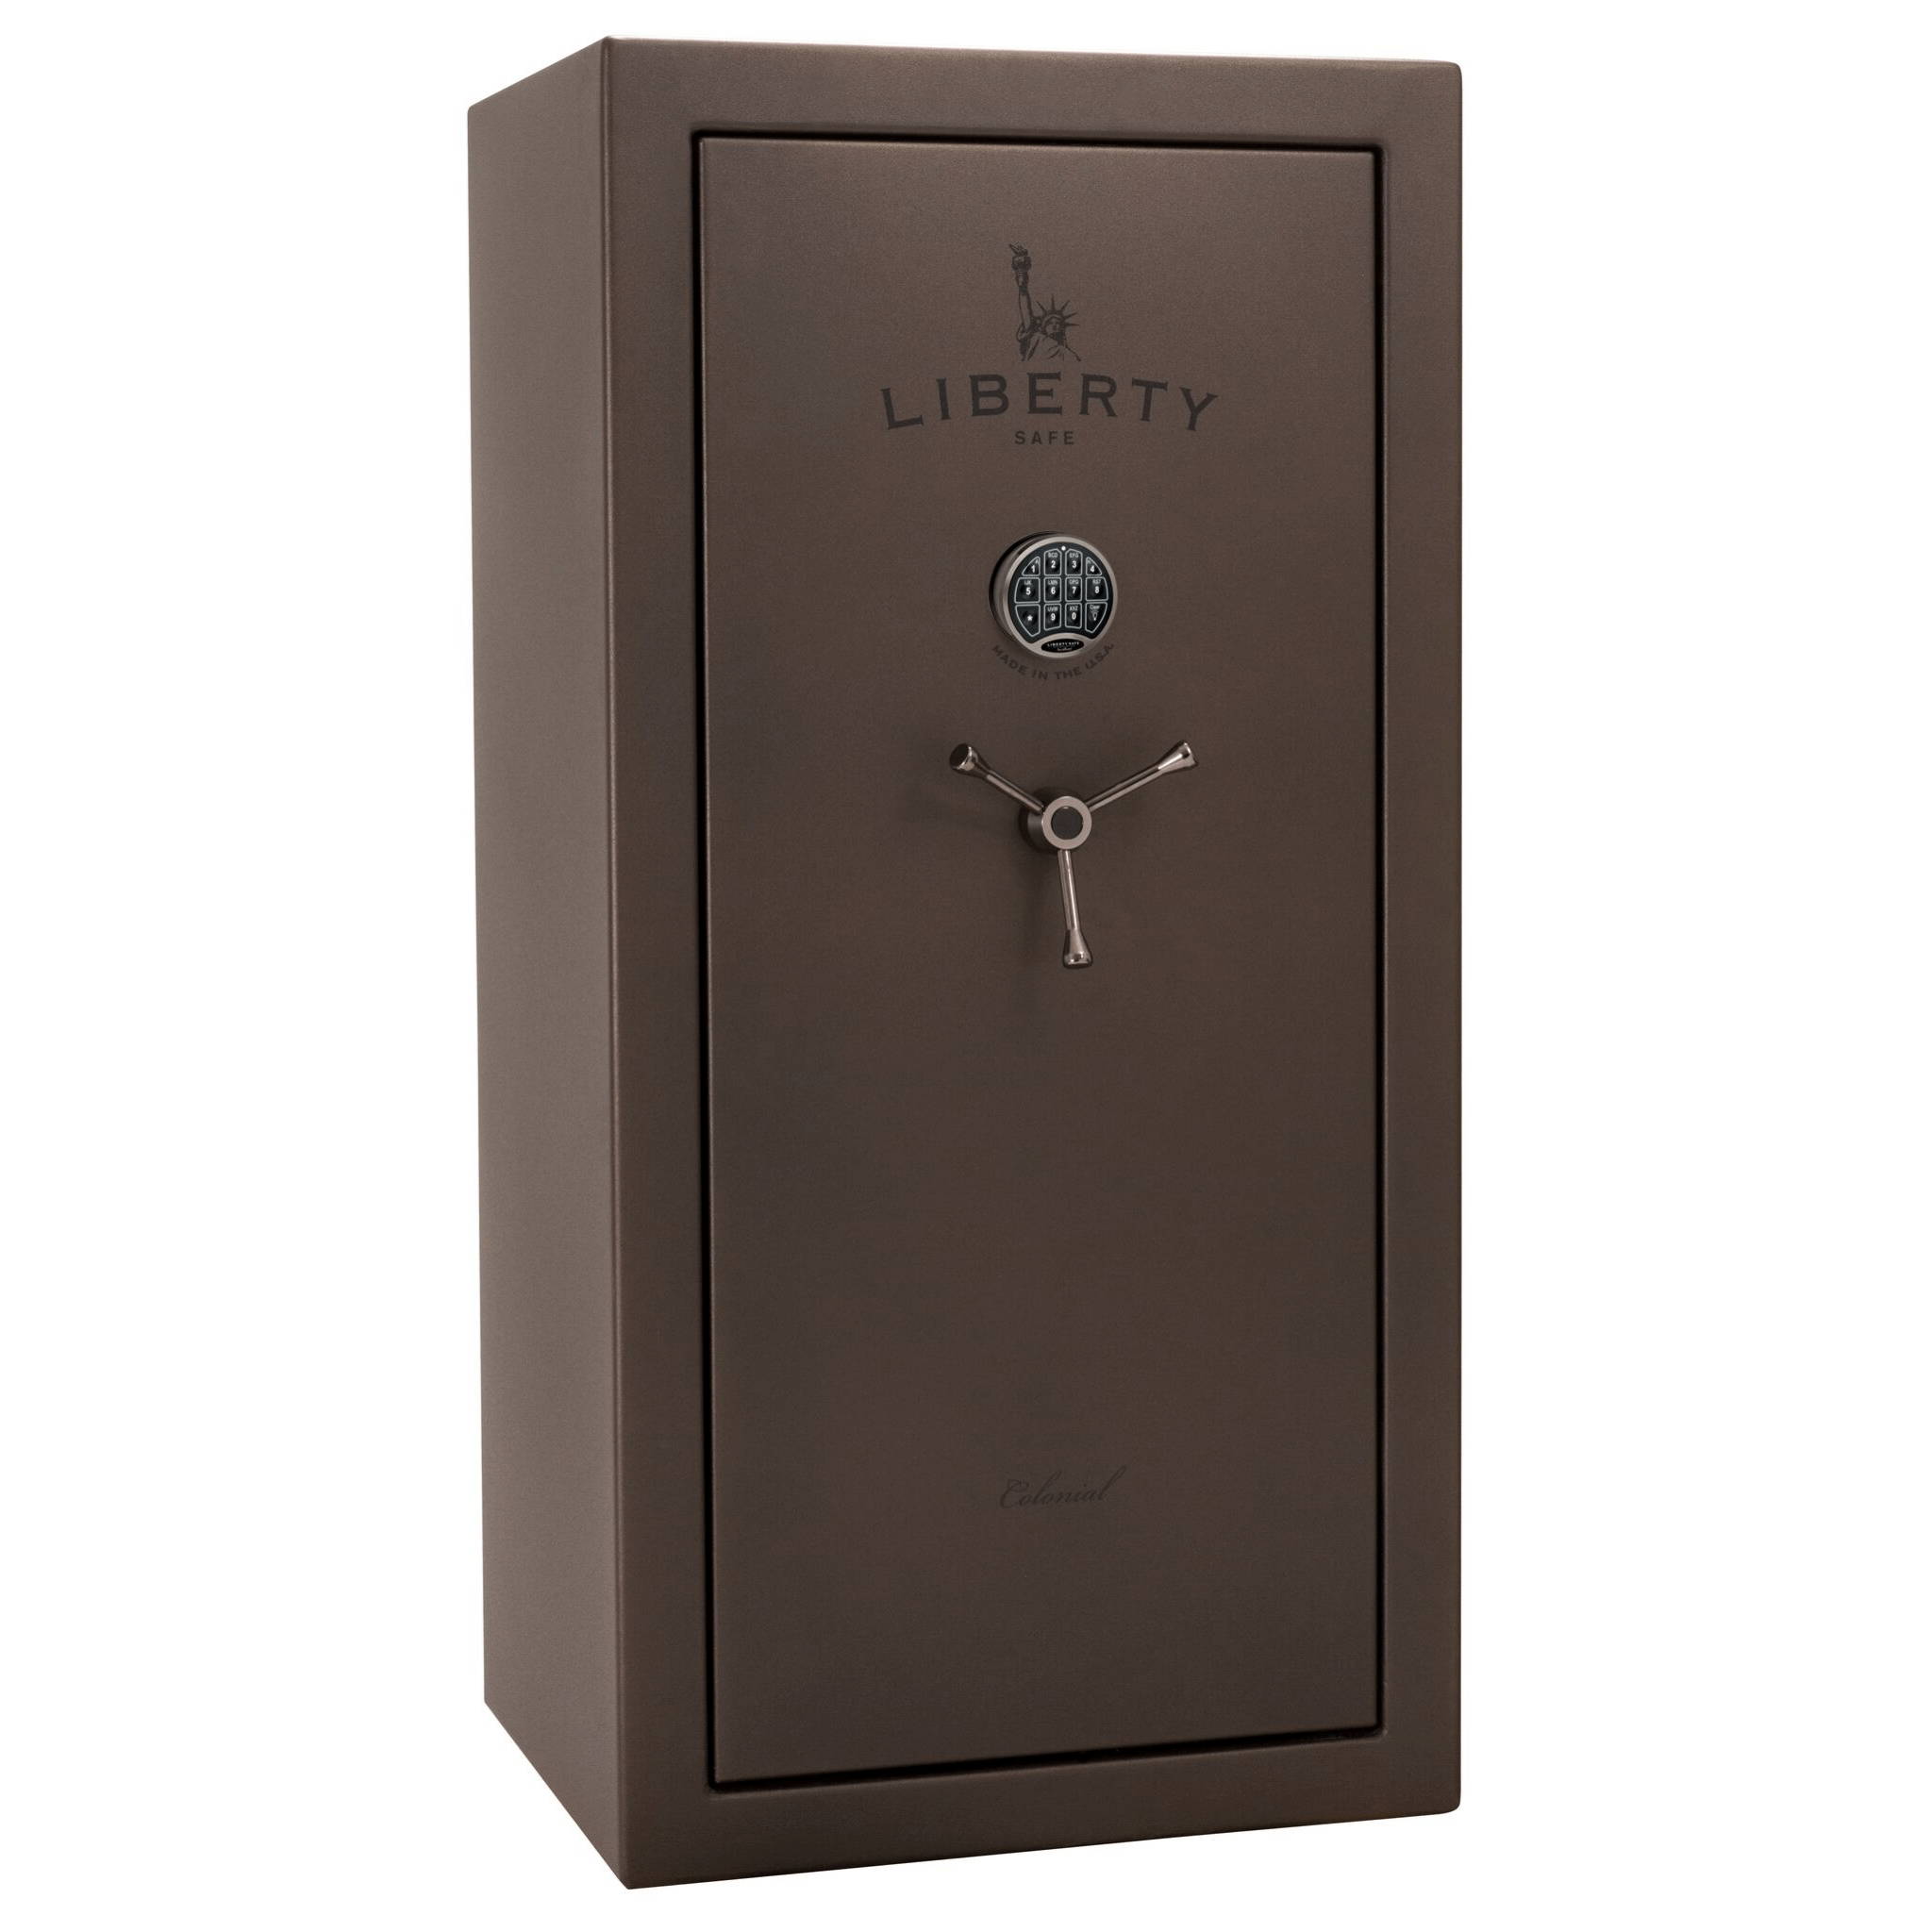 Liberty Safe Colonial series